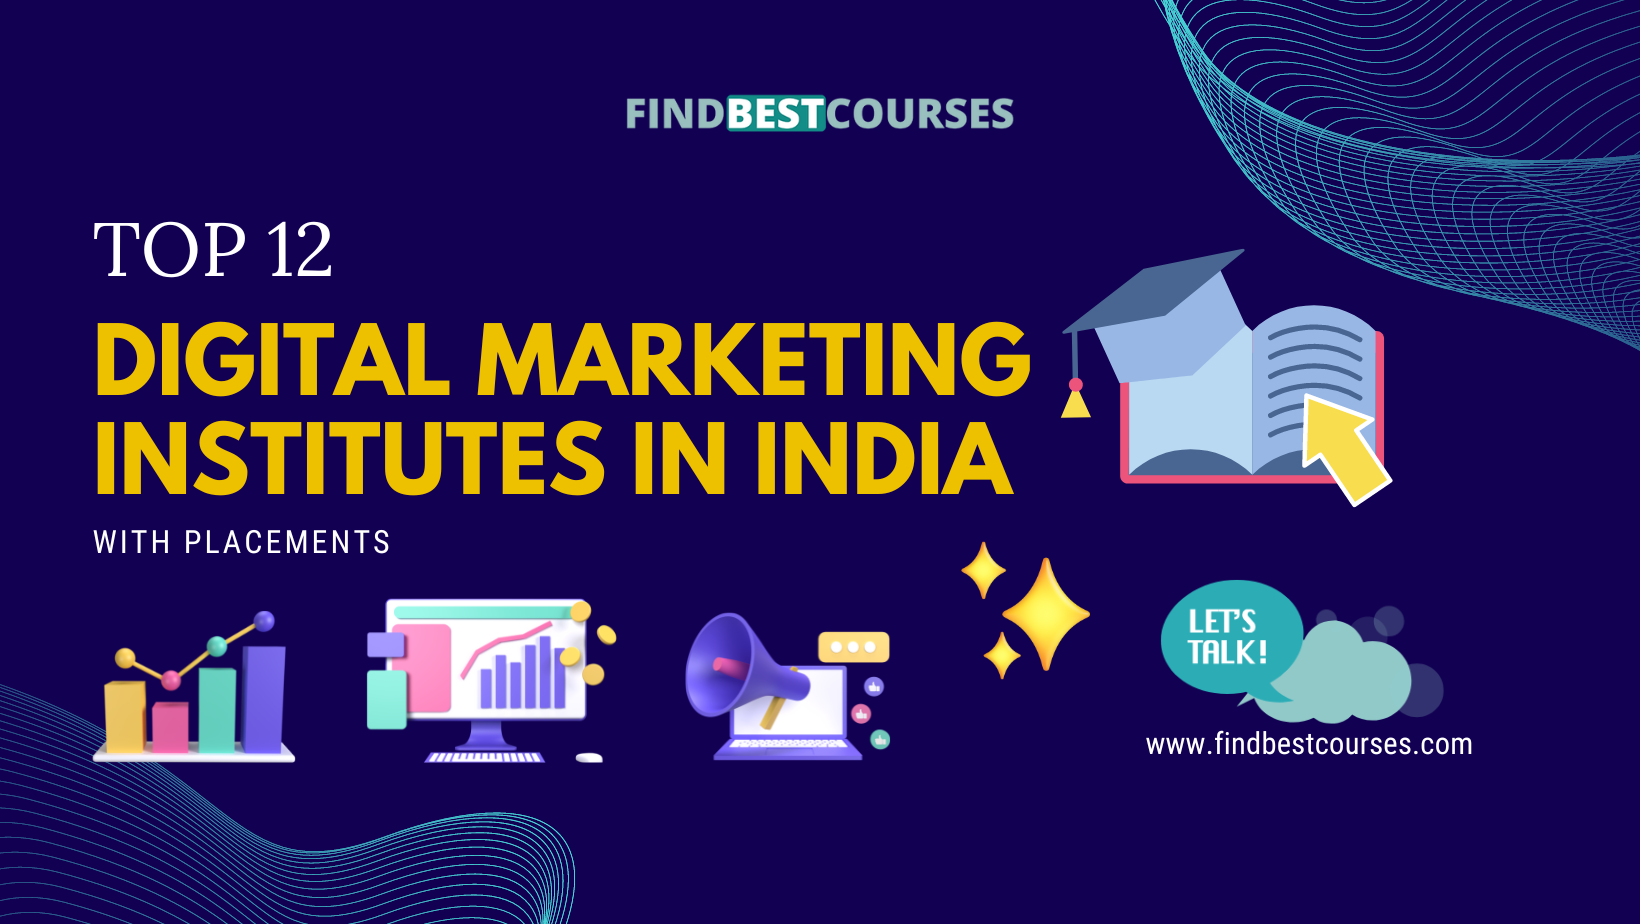 Top 12 Digital Marketing Institutes in India with Placements